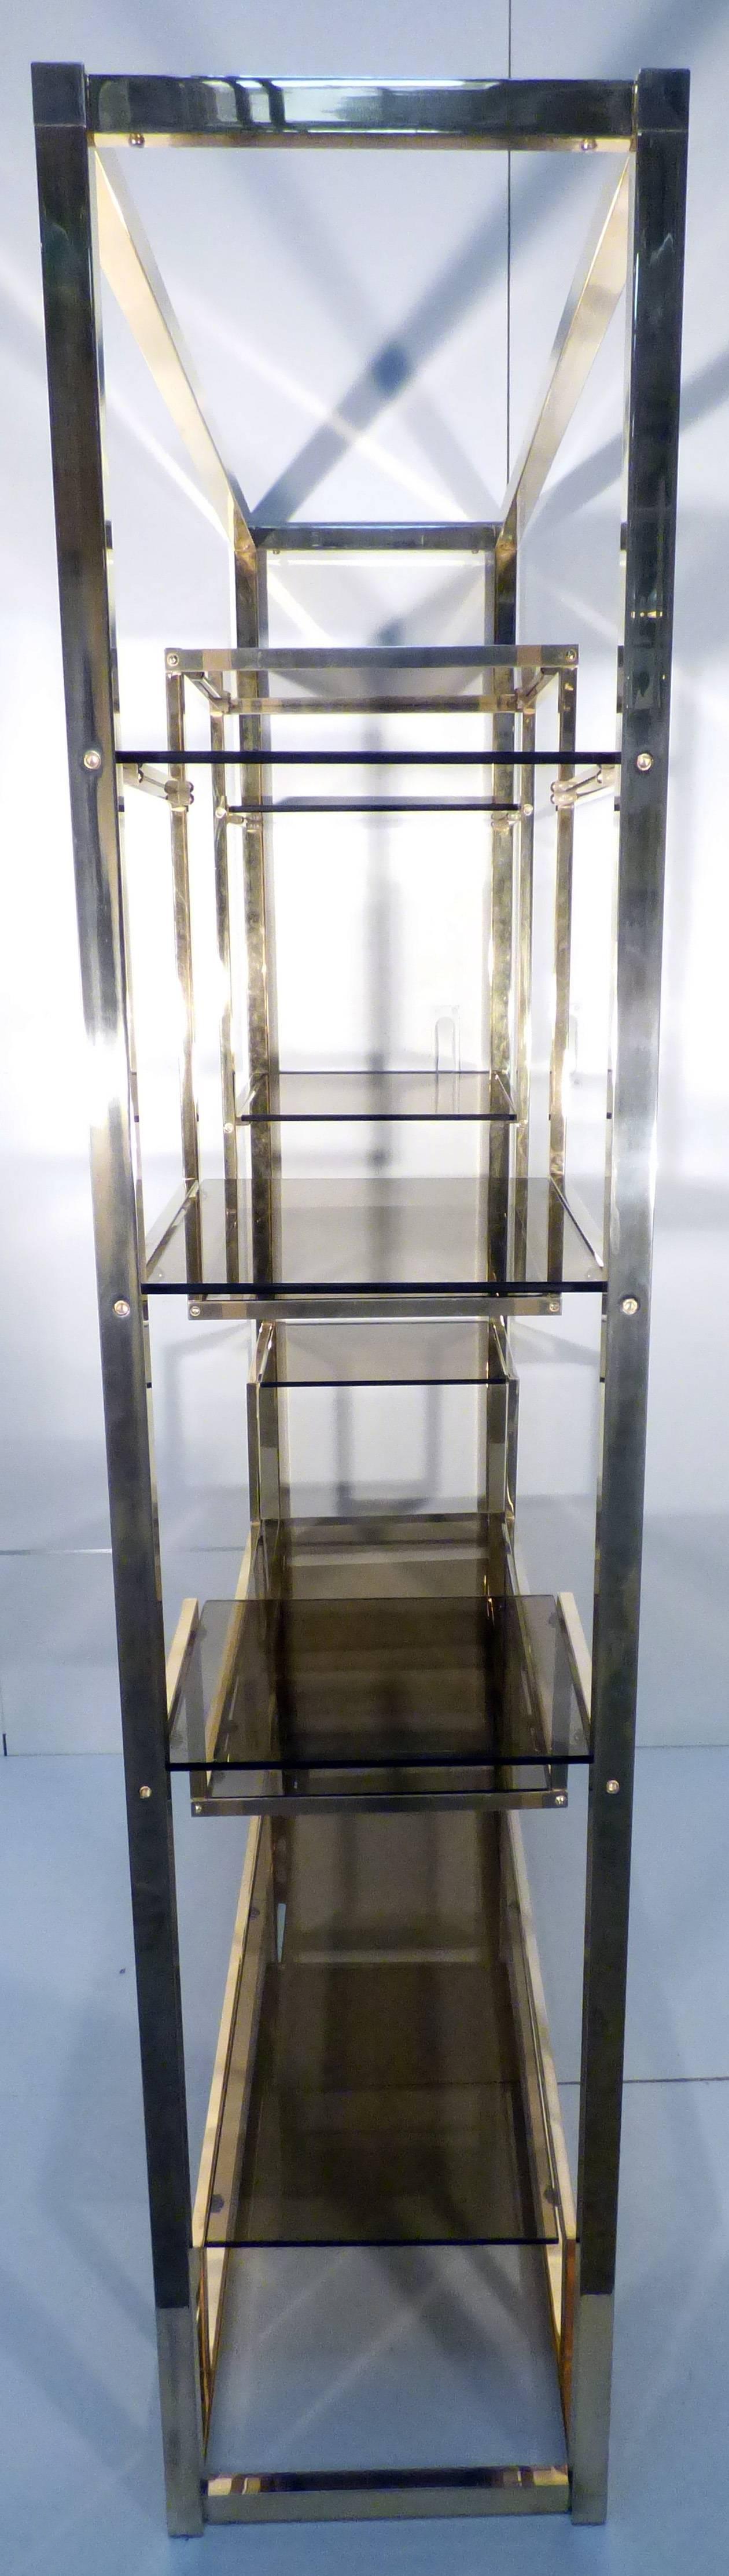 Mid-Century Modern Etagere Brass and Glass Room Divider by Romeo Rega from Italy - Shelve For Sale